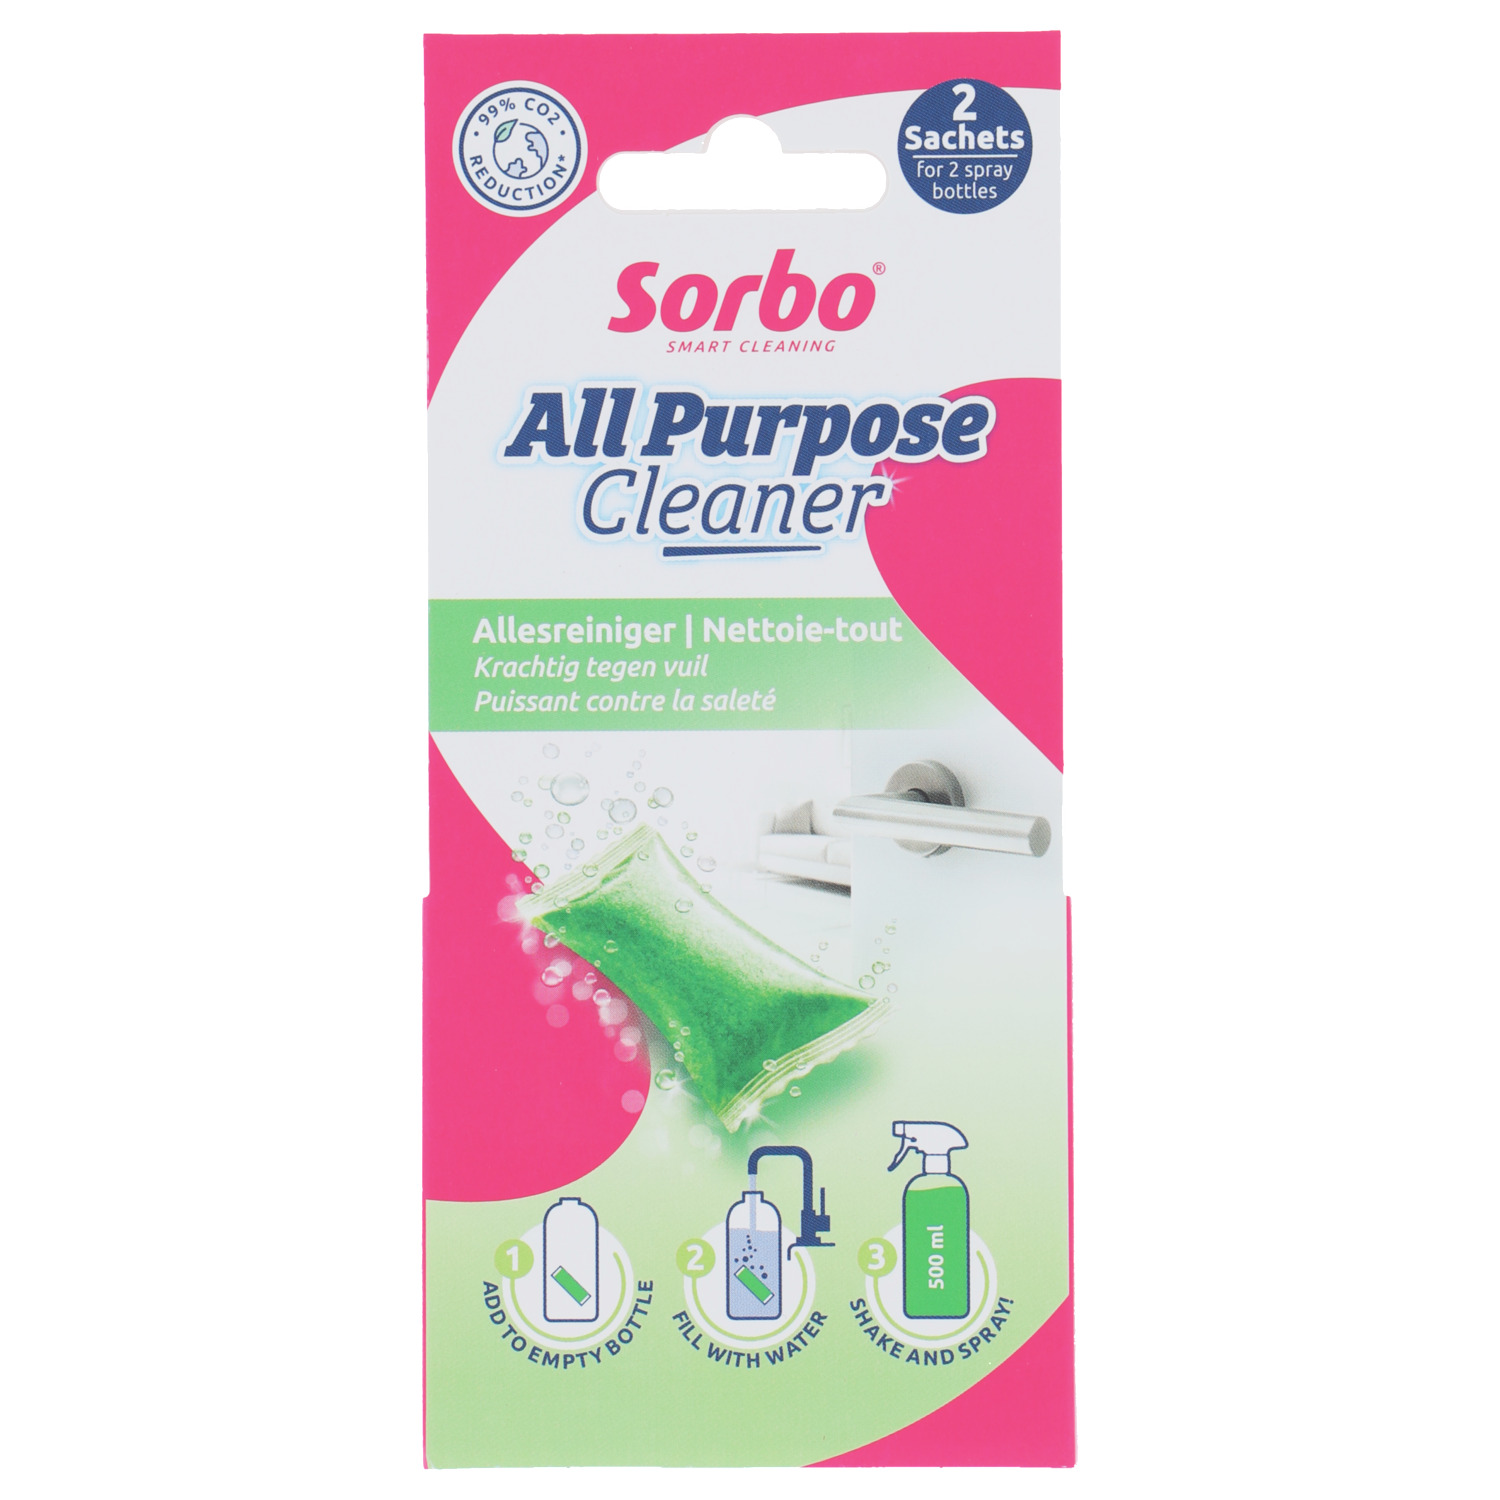 All-purpose Cleaner sachets 2St